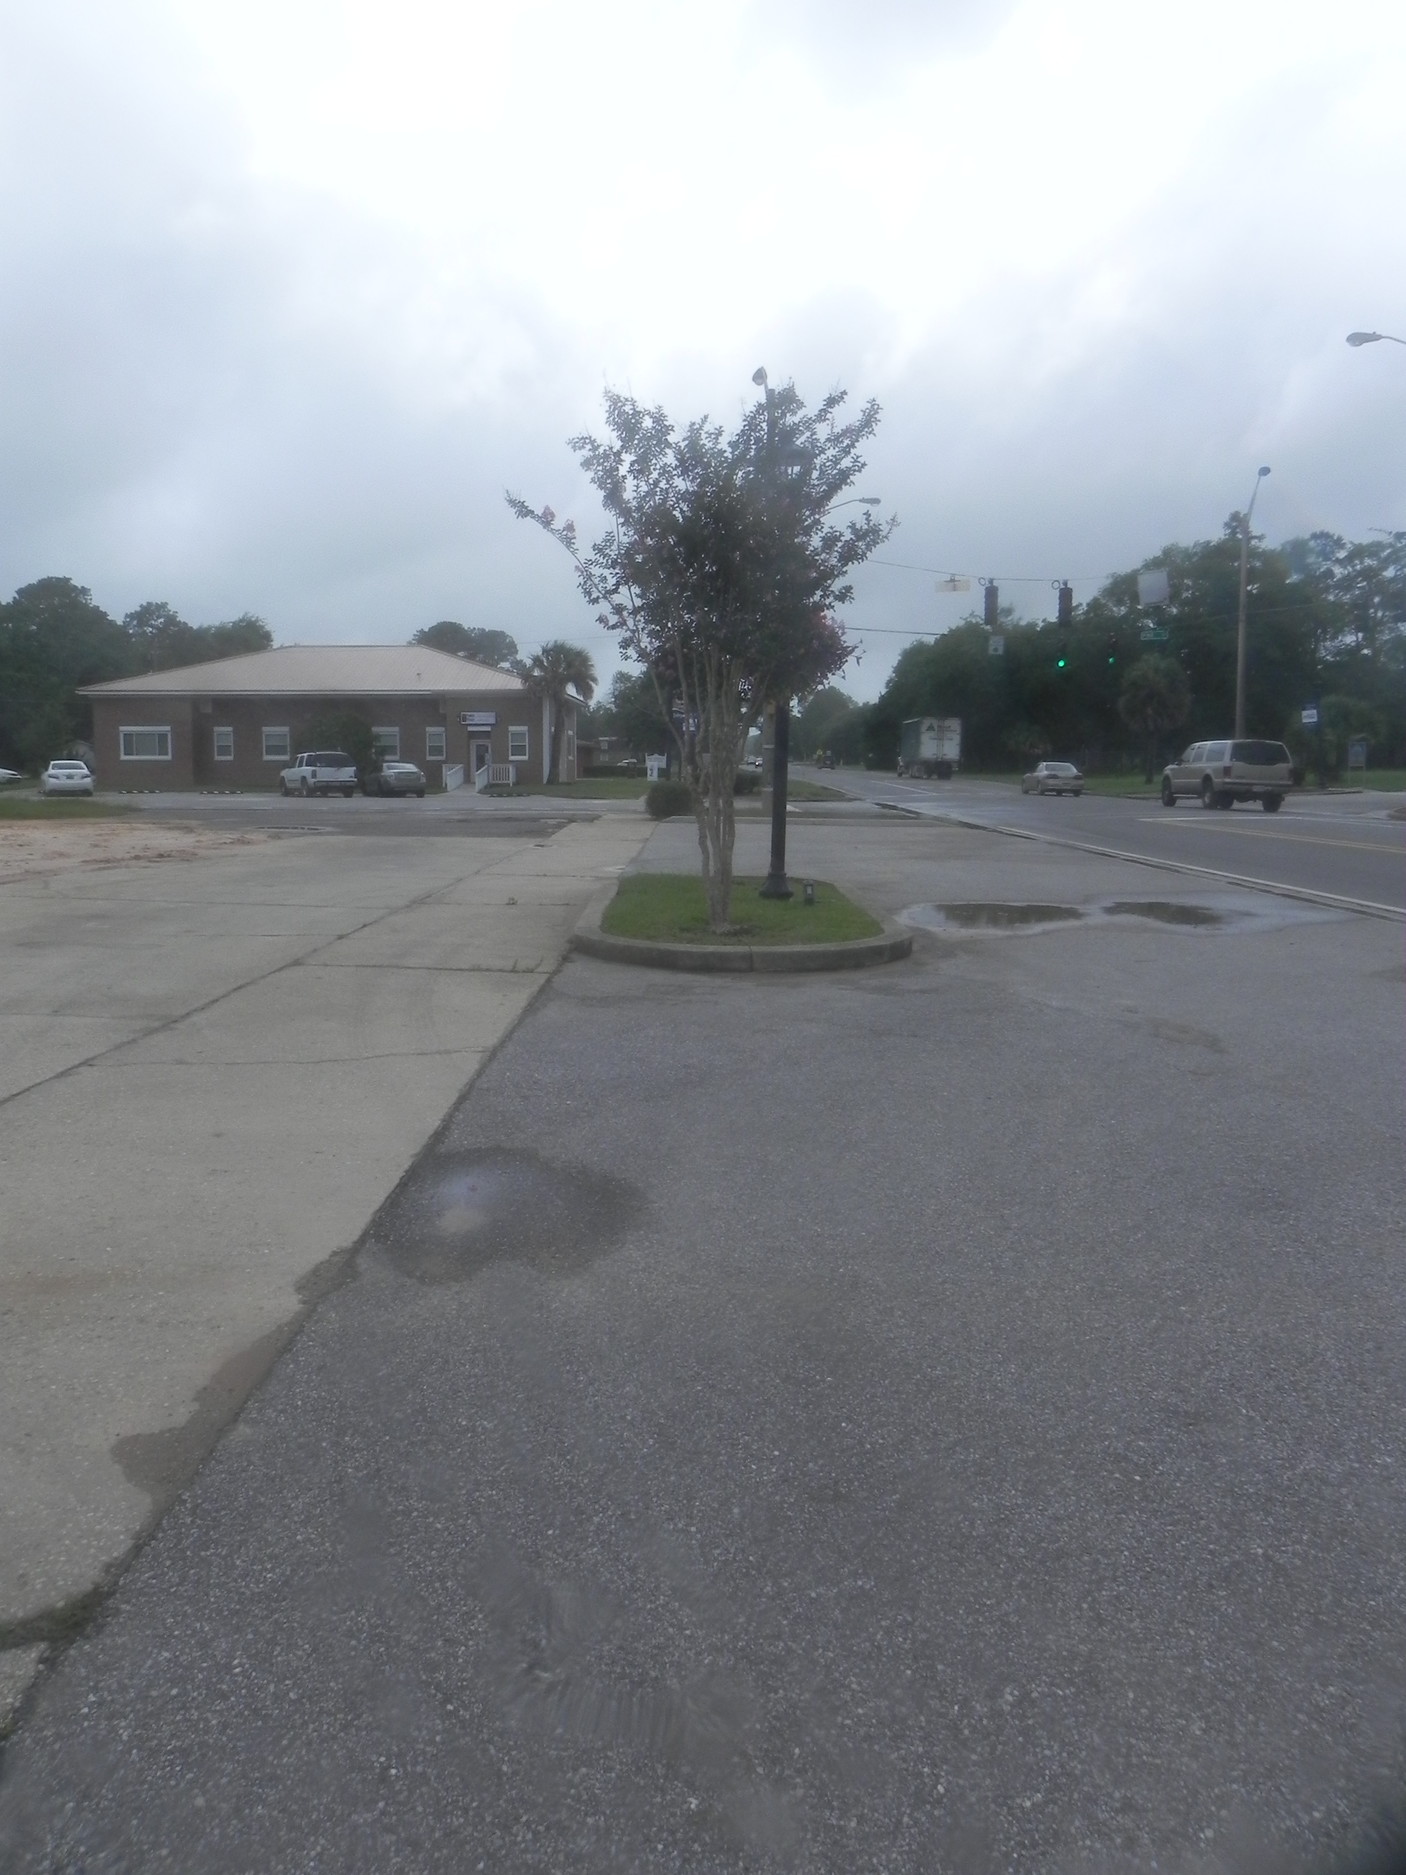 The old BP location on the corner of Hwy 98 and Pine St. will be upgraded to offer 7 extra parking spaces to Downtown Foley visitors.